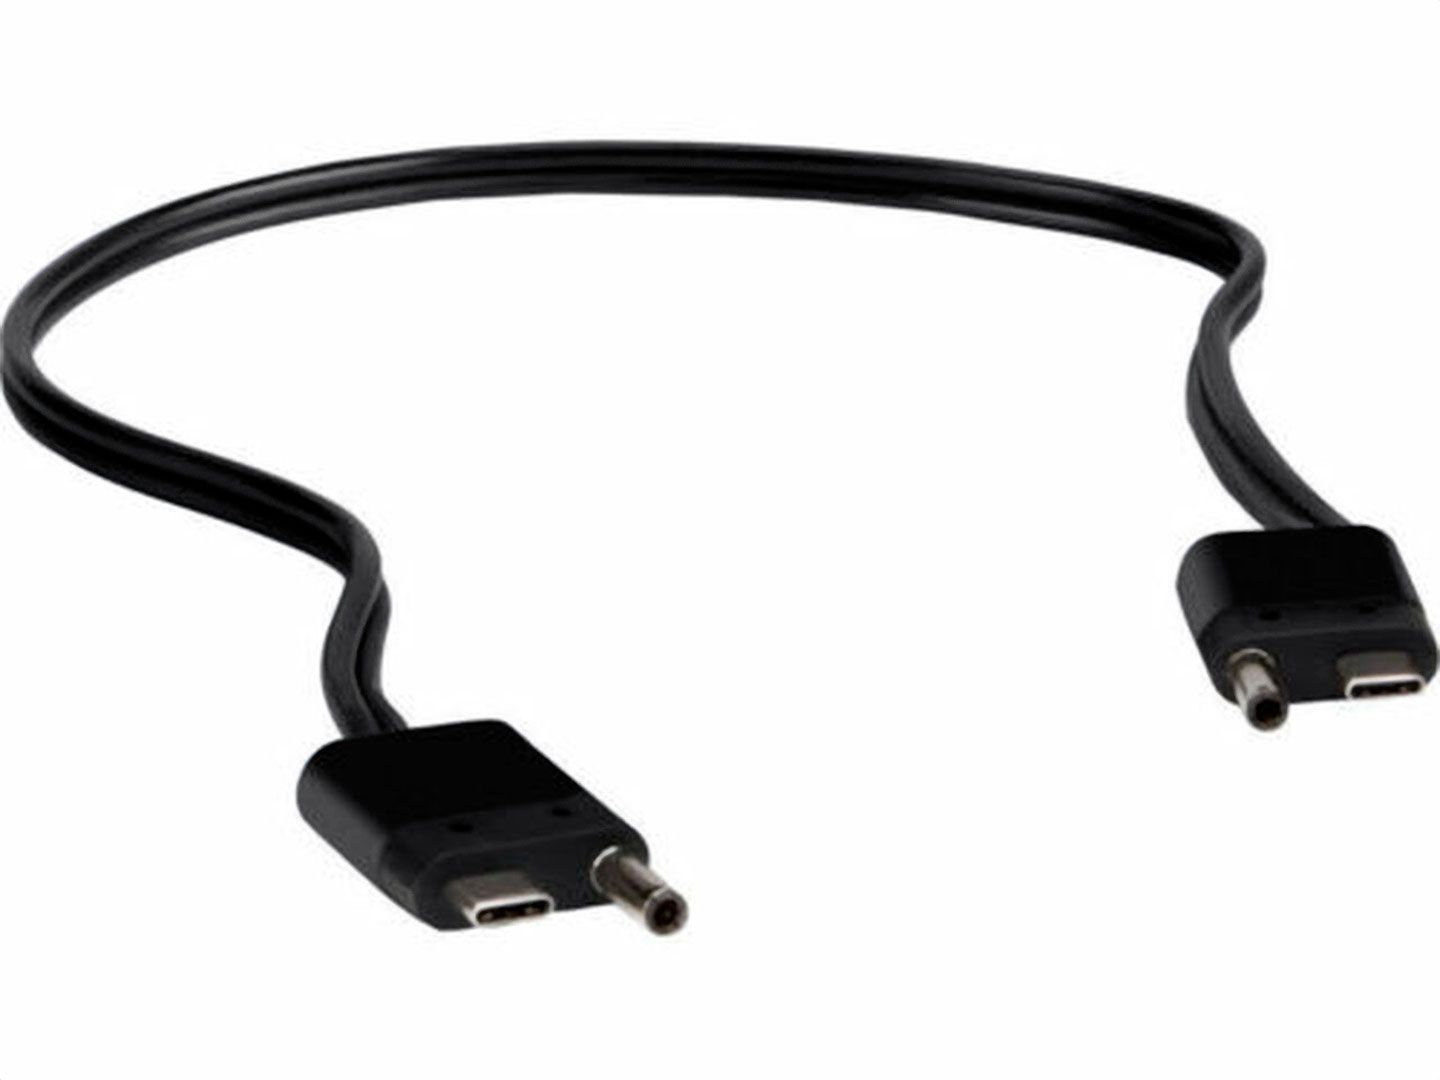 HP Zbook Thunderbolt 3 Power Cable A (843010-001, 855116-001) R